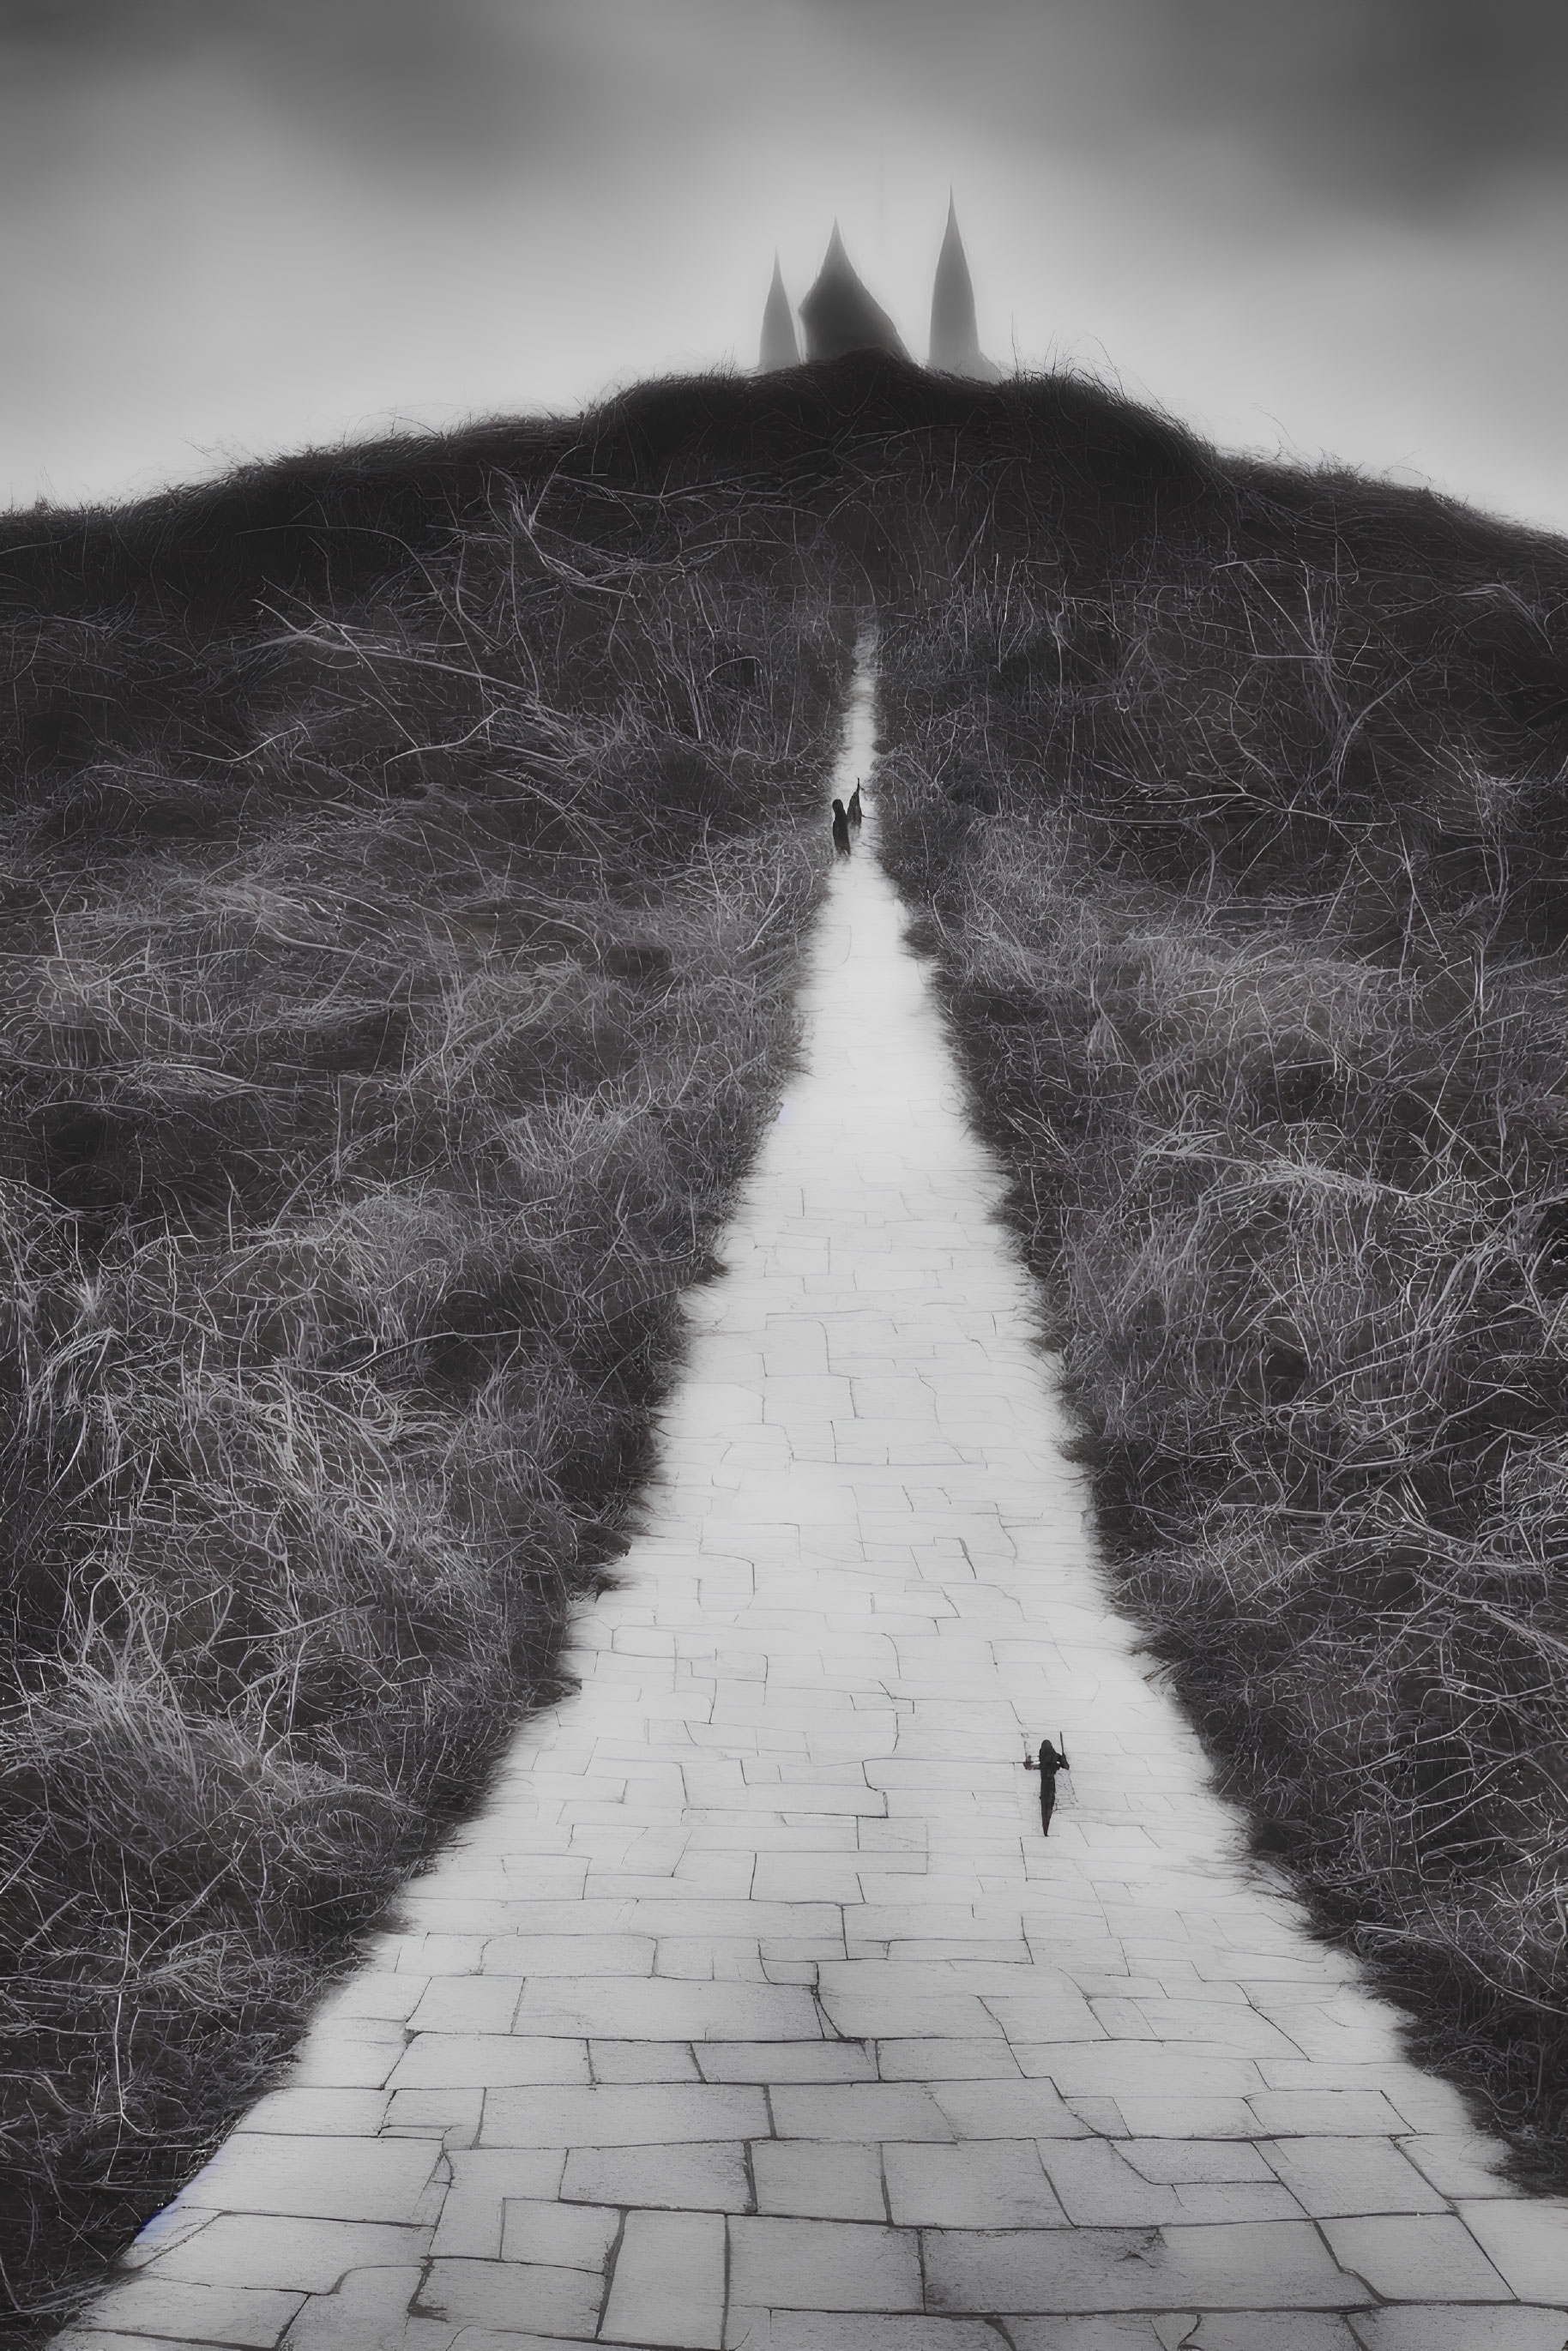 Monochrome image of winding path to misty castle